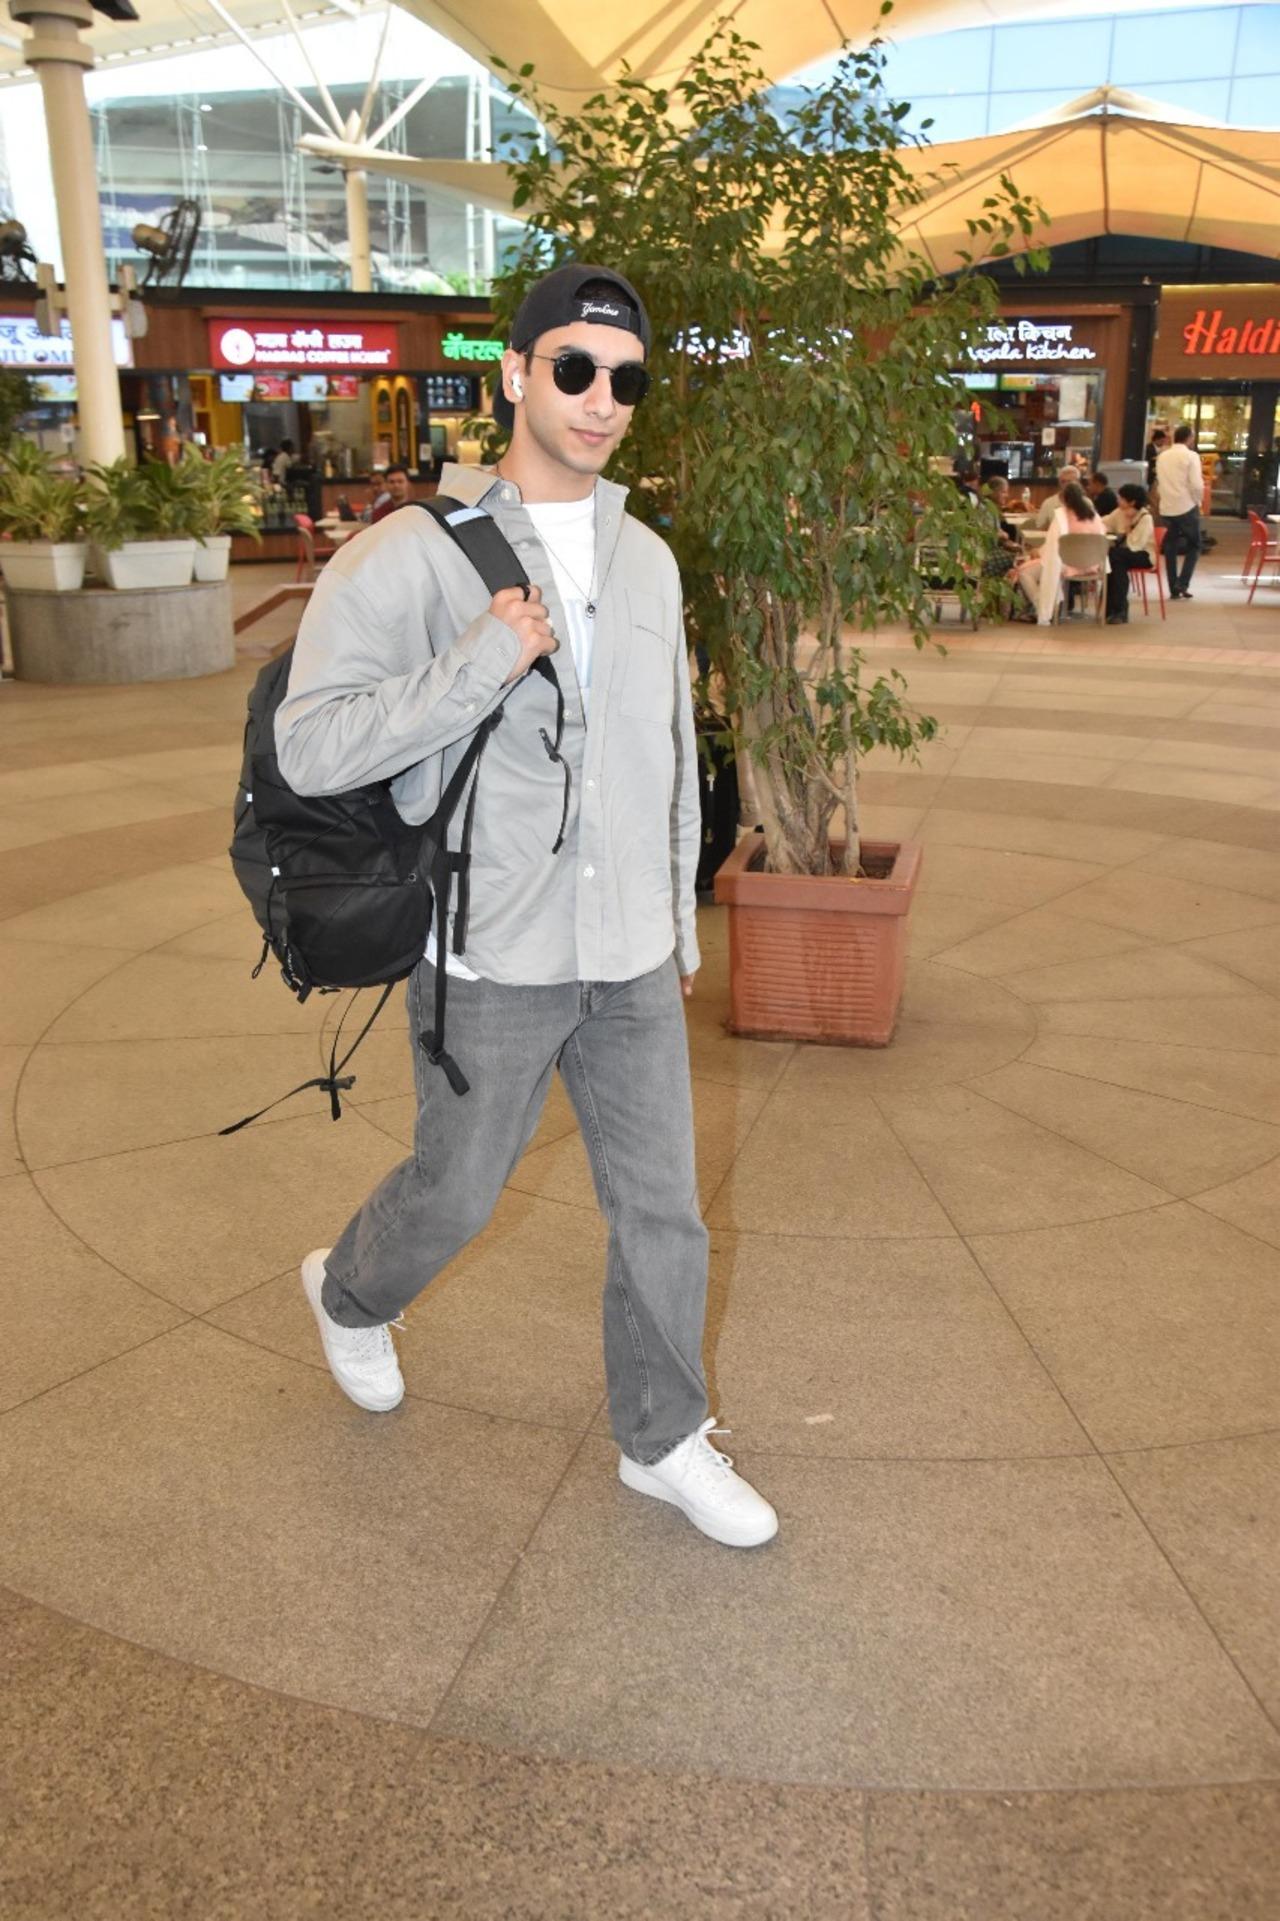 Actor Vedang Raina of 'The Archies,' showcased his sense of style as he was seen leaving the airport. He wore grey jeans and oversized shirt worn over a white t-shirt. He opted to accessorize the look with heavy black sunglasses and a cap